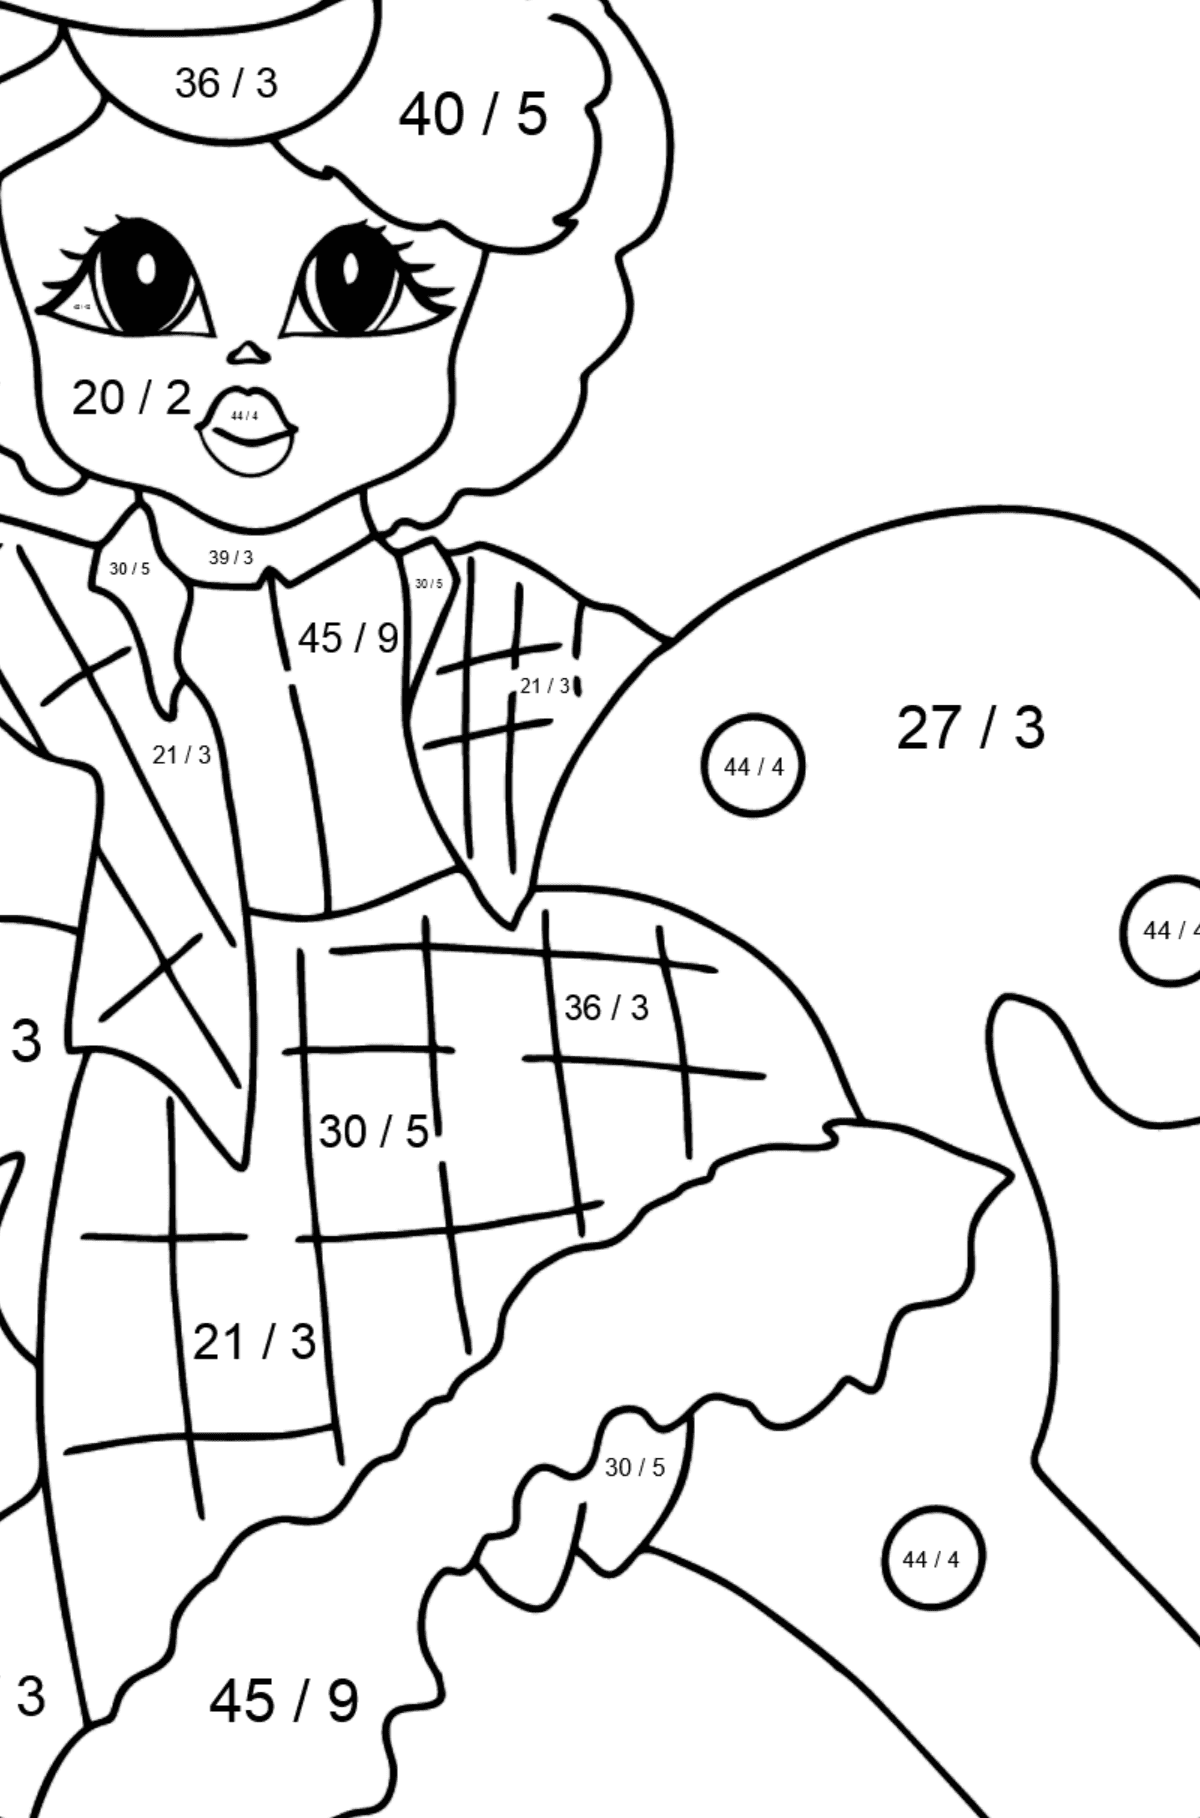 Coloring Page - A Princess on a Horse - Math Coloring - Division for Kids